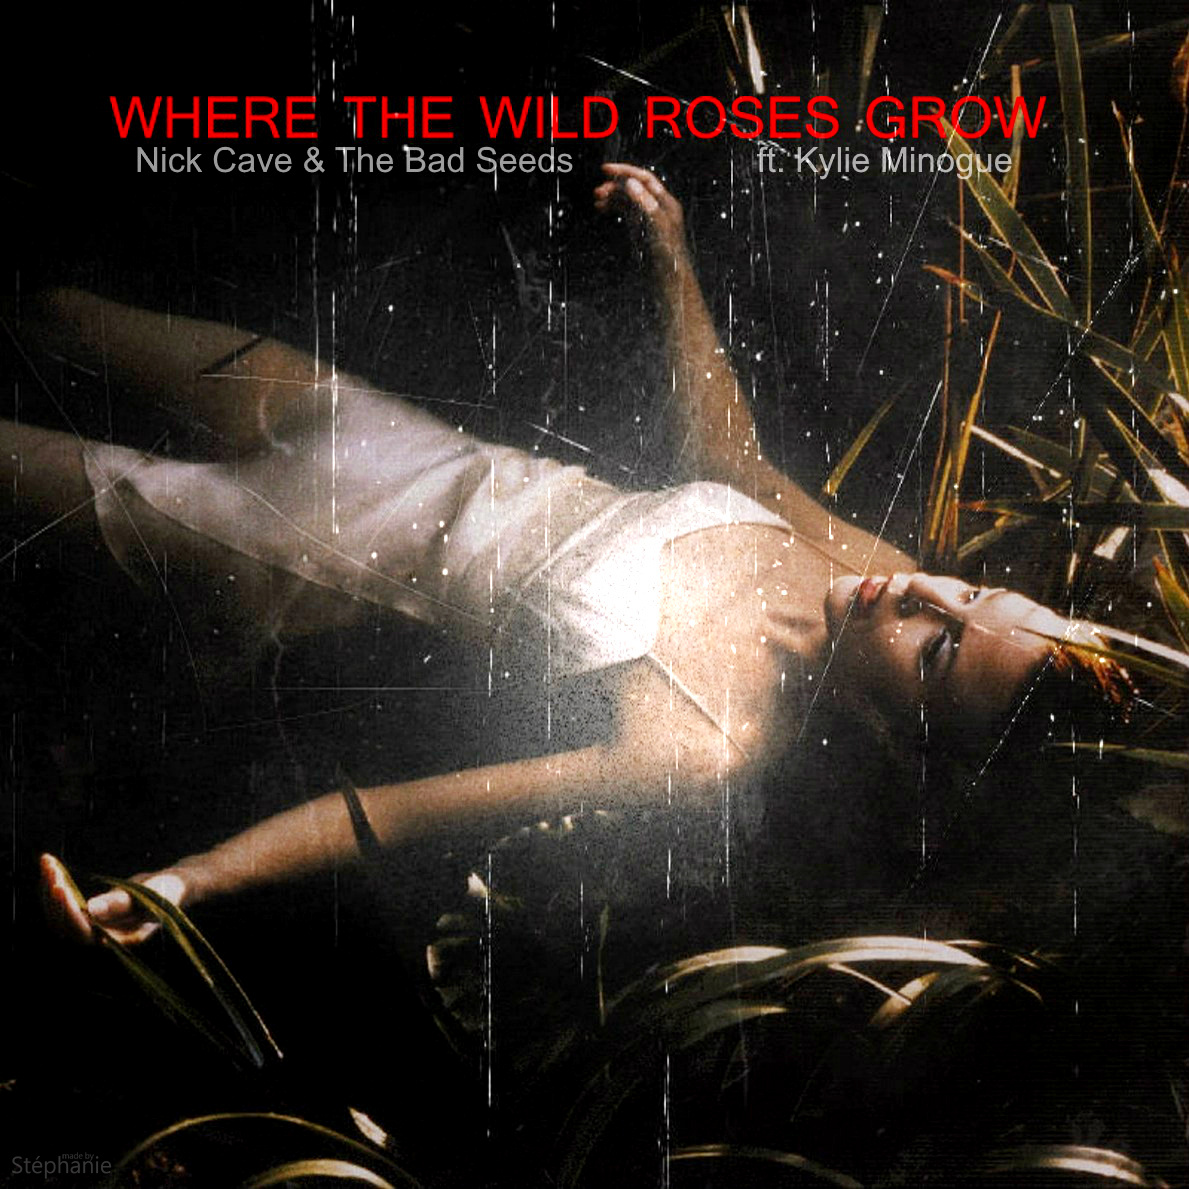 Grow nick. Where the Wild Roses grow Nick Cave and the Bad Seeds. Nick Cave Kylie Minogue where the Wild Roses grow.